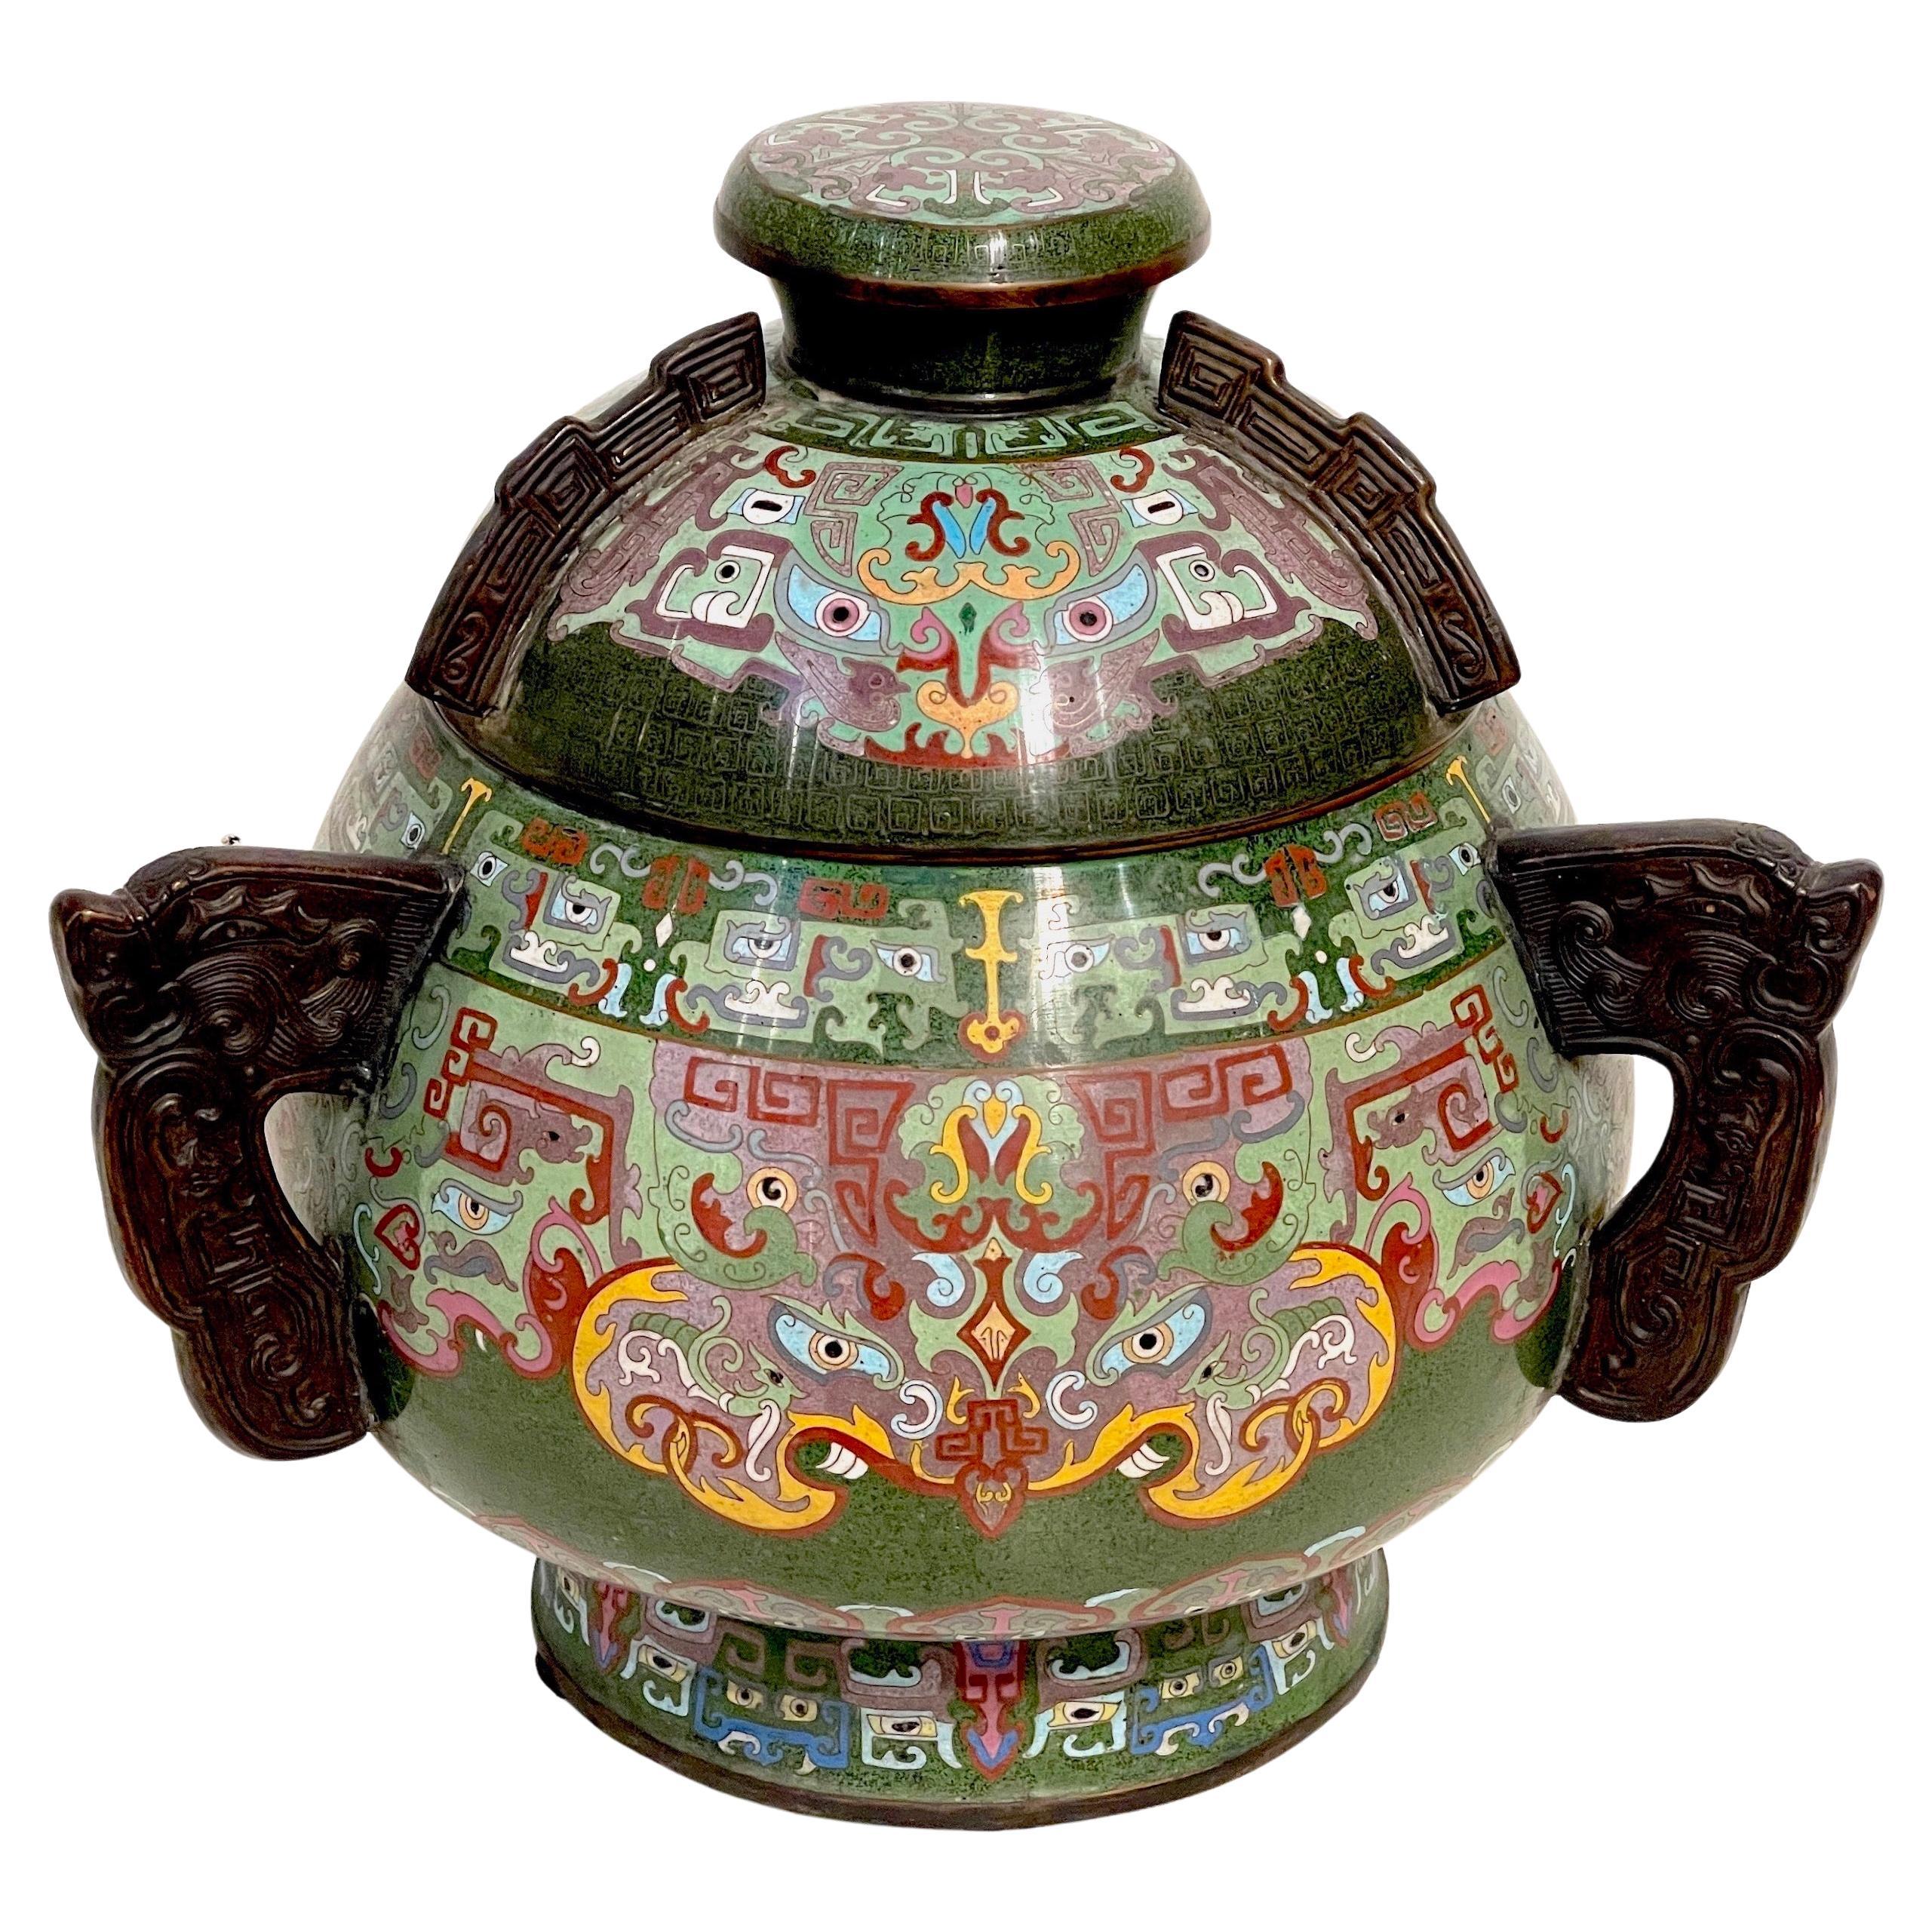 Massive 20th Century Chinese Archaic Style Cloisonné Covered Urn/ Censor  For Sale